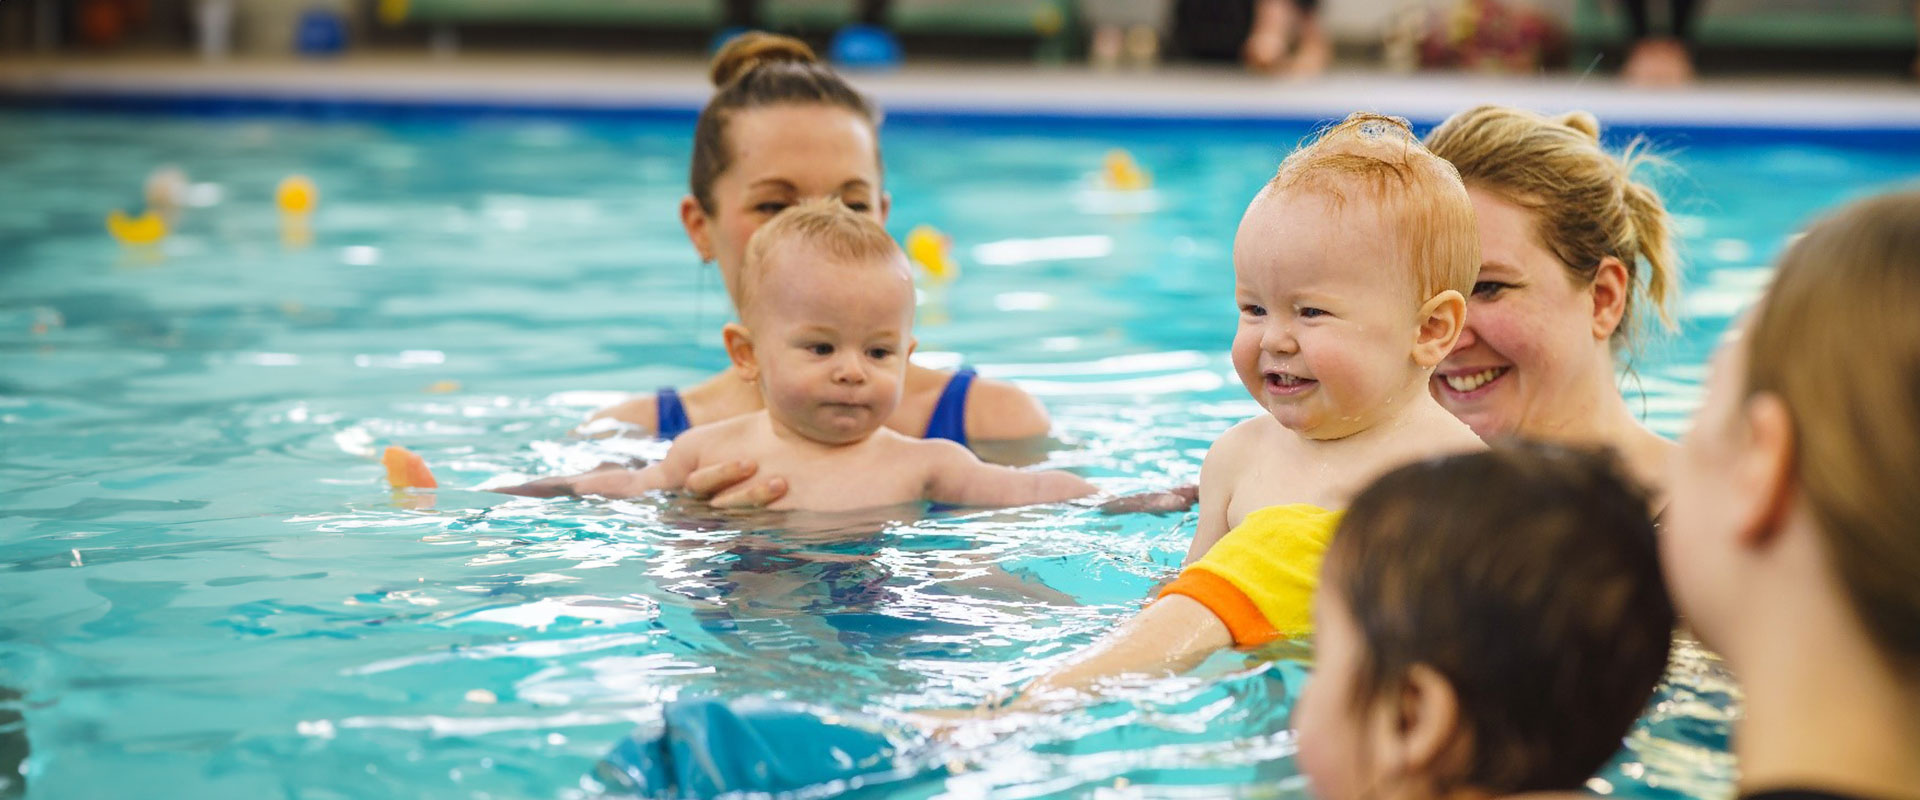 5 Top Tips for Building Water Confidence with Your Child